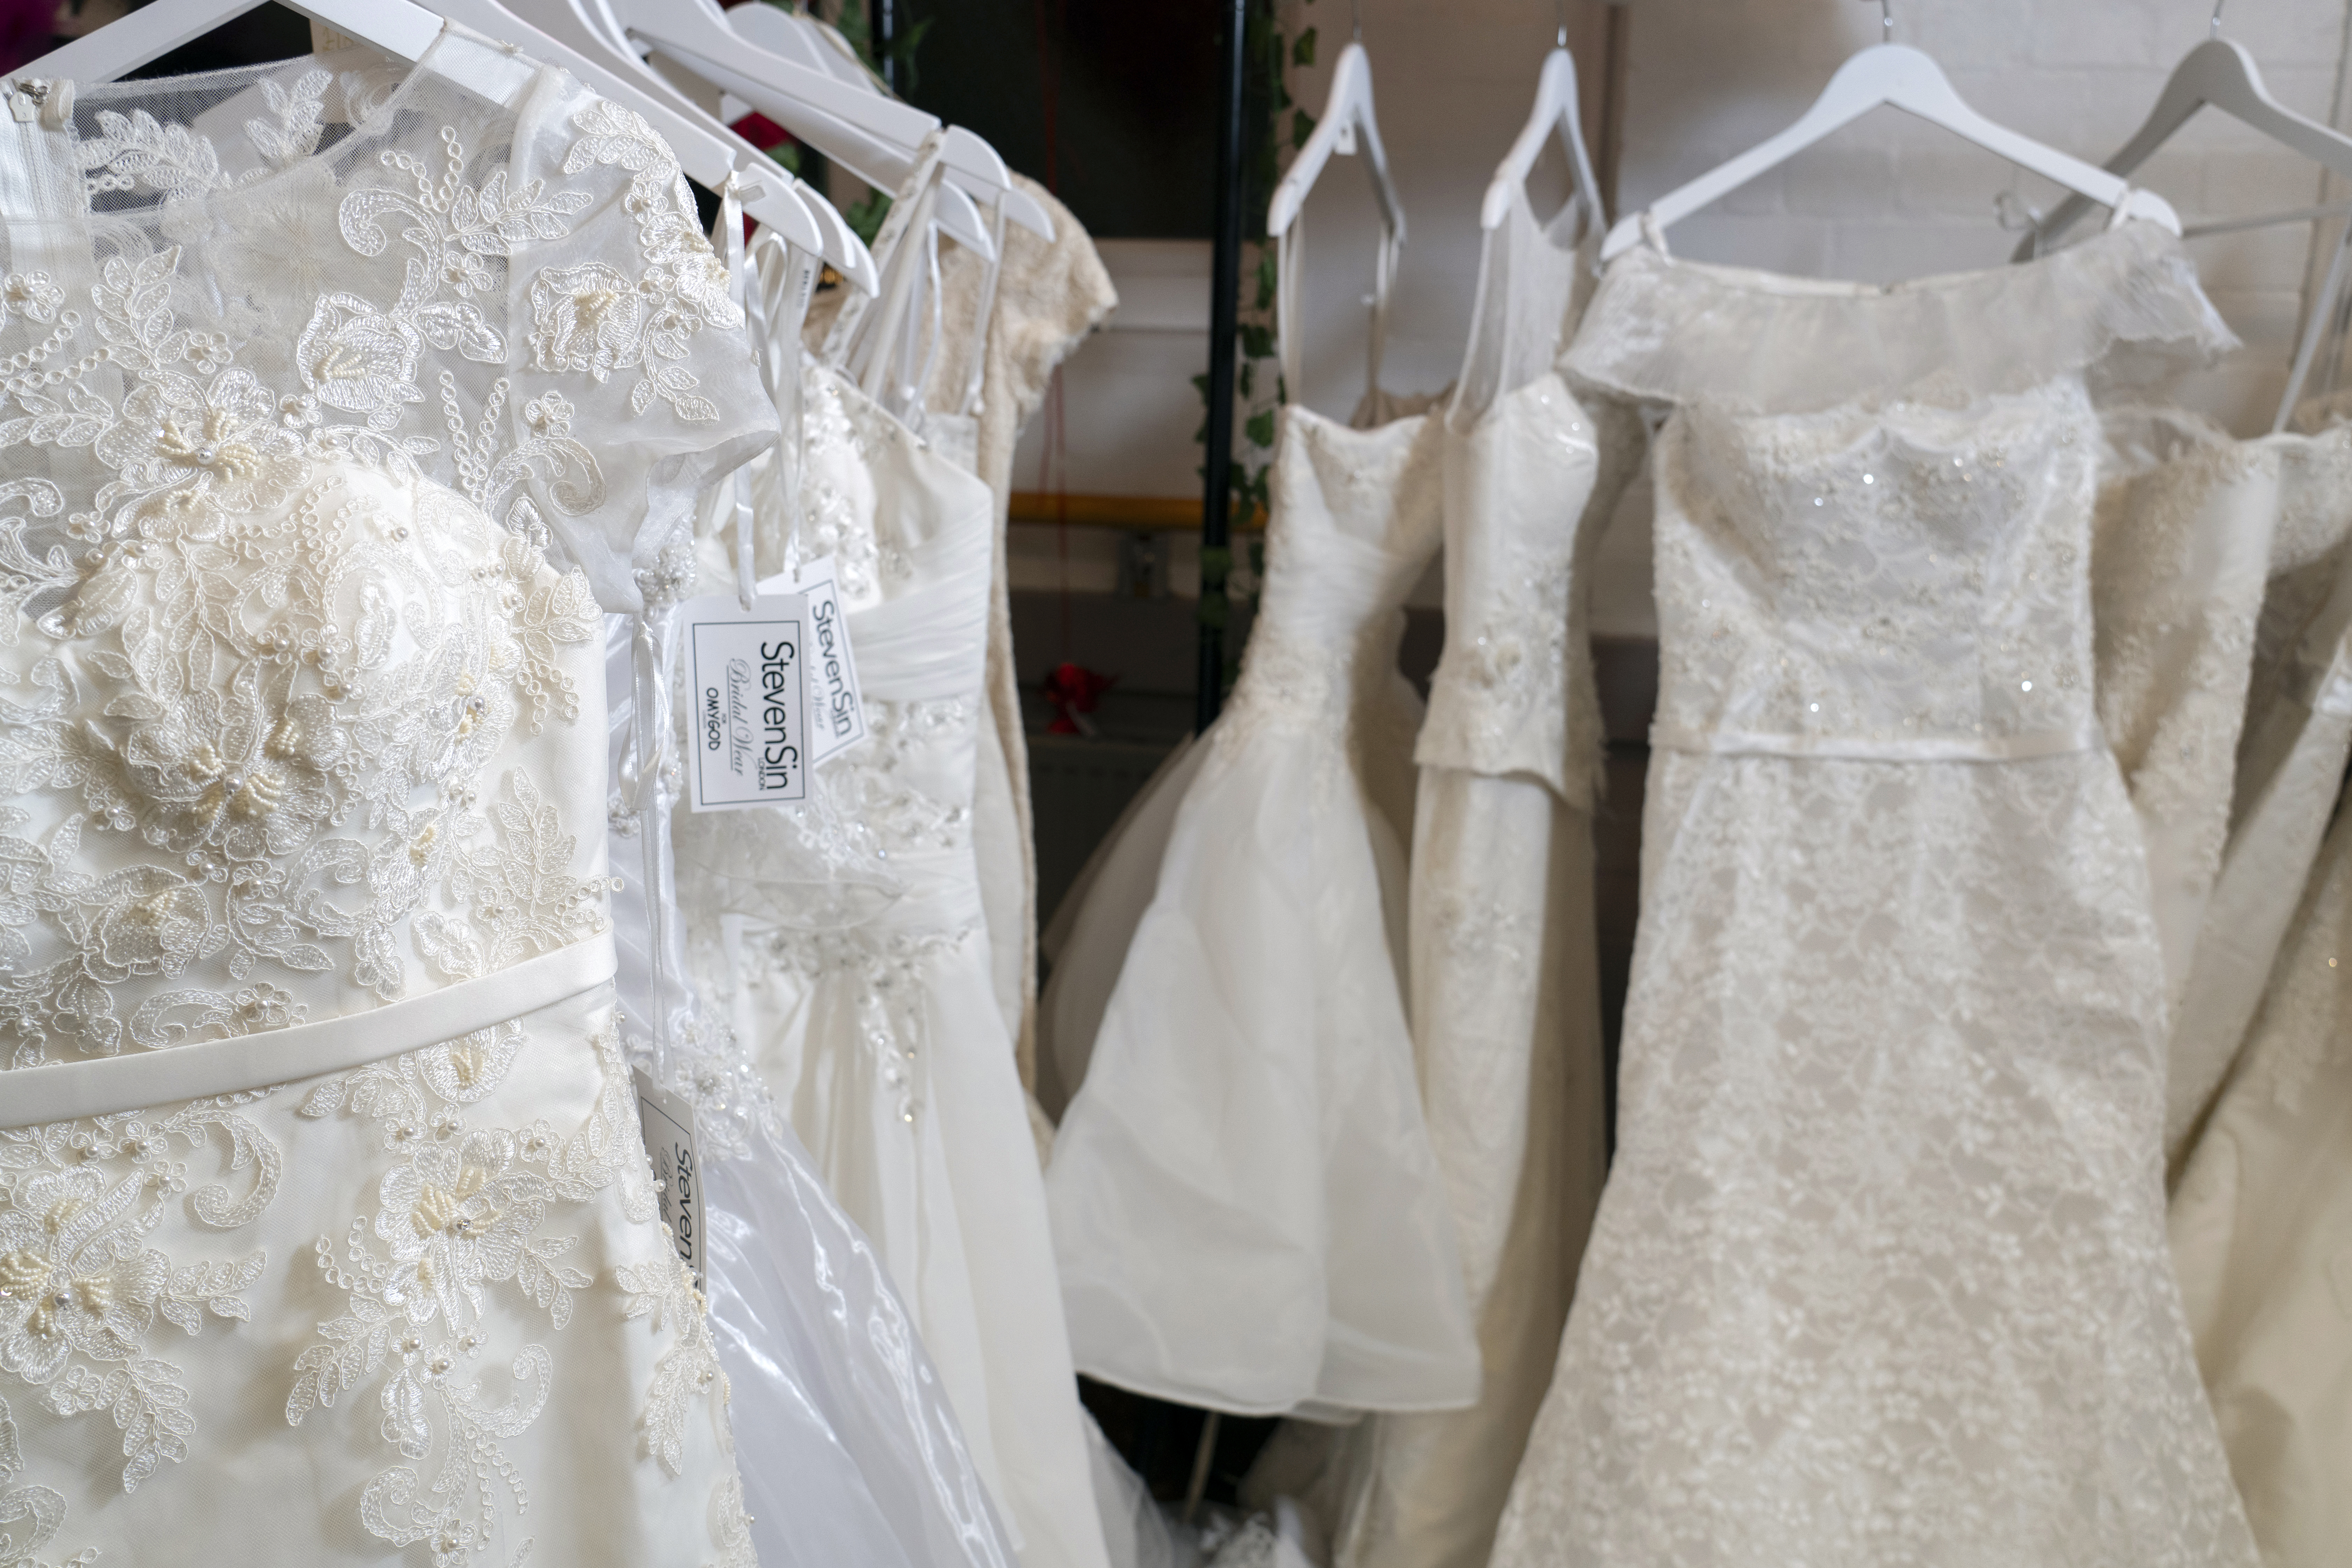 A photo of the wedding dresses